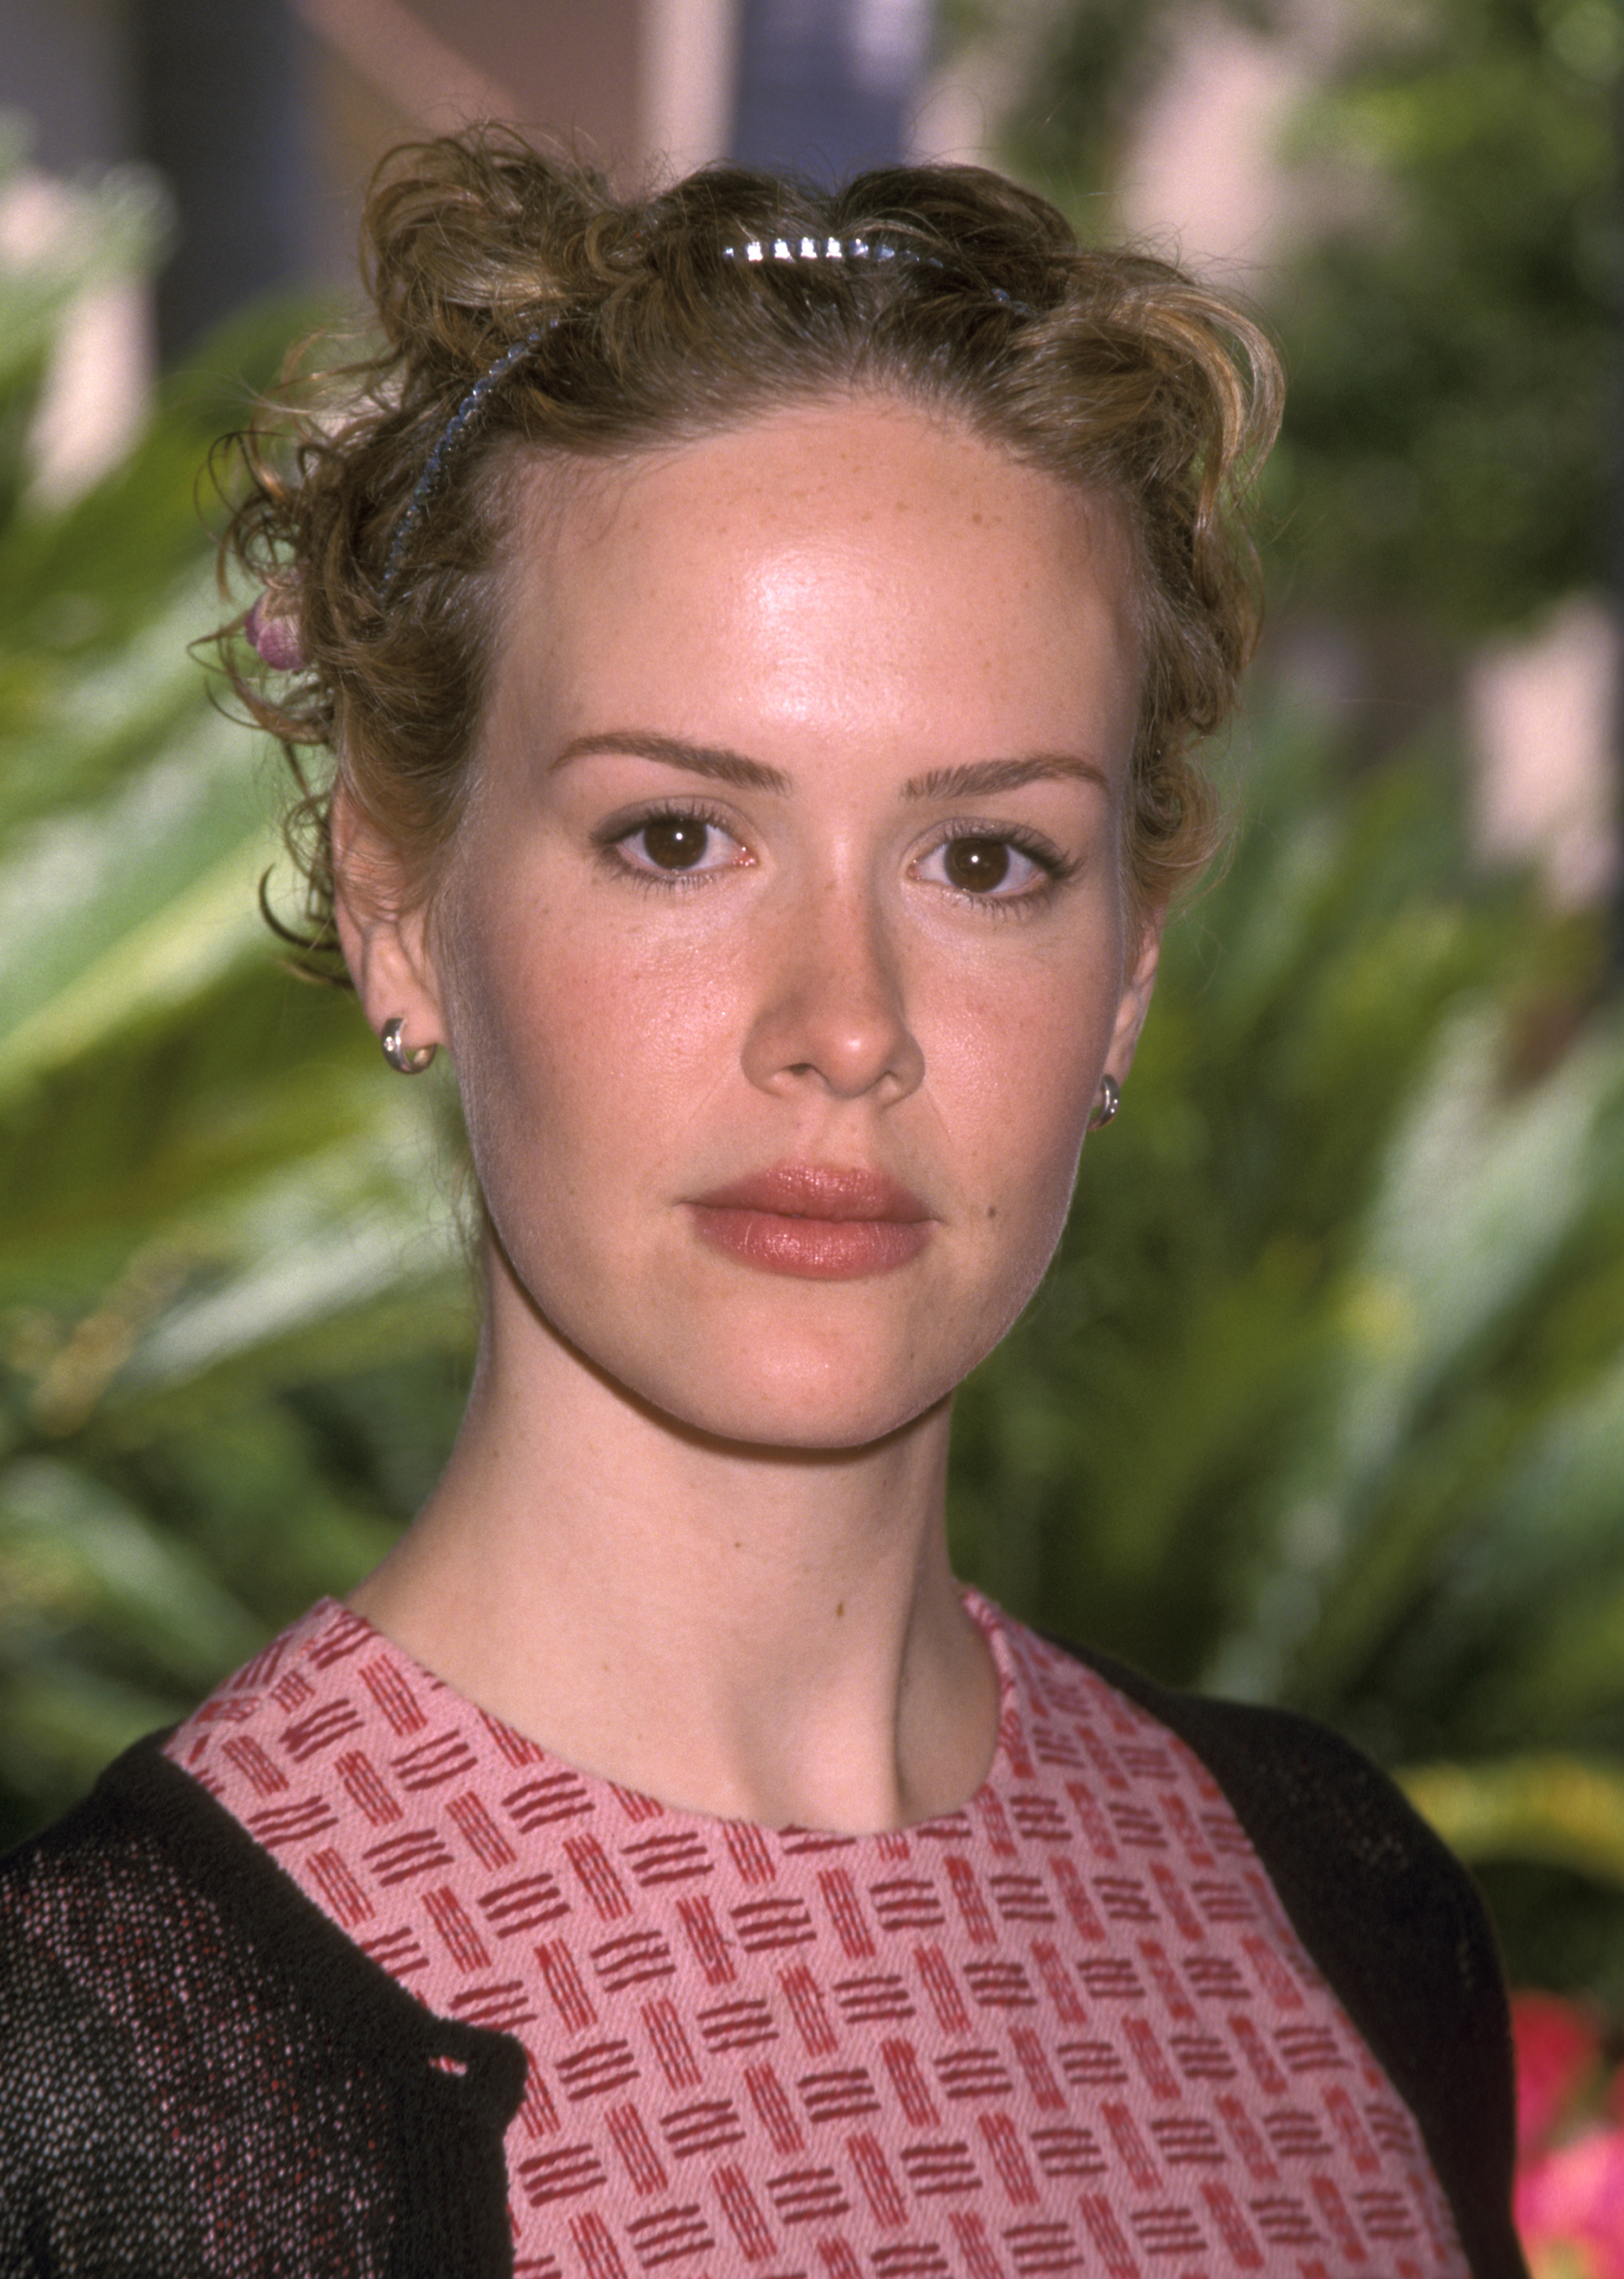 The actress during a press tour at the Ritz-Carlton Hotel in Pasadena, California, on July 20, 1999. | Source: Getty Images